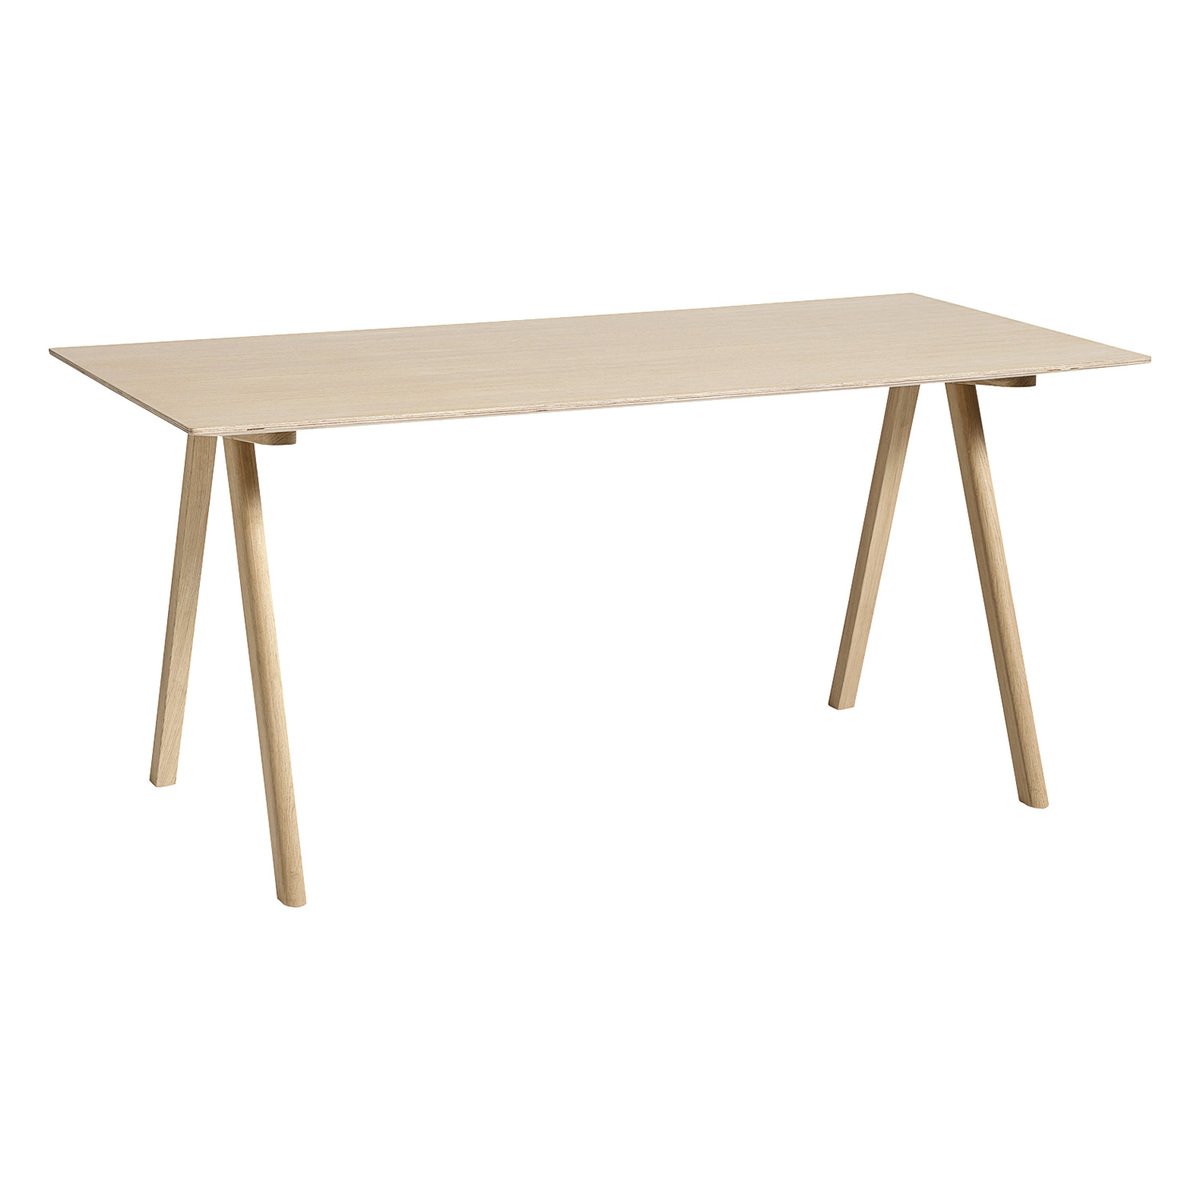 Specialisere lighed Søndag HAY CPH10 table 160 x 80 cm, lacquered oak | Finnish Design Shop CH